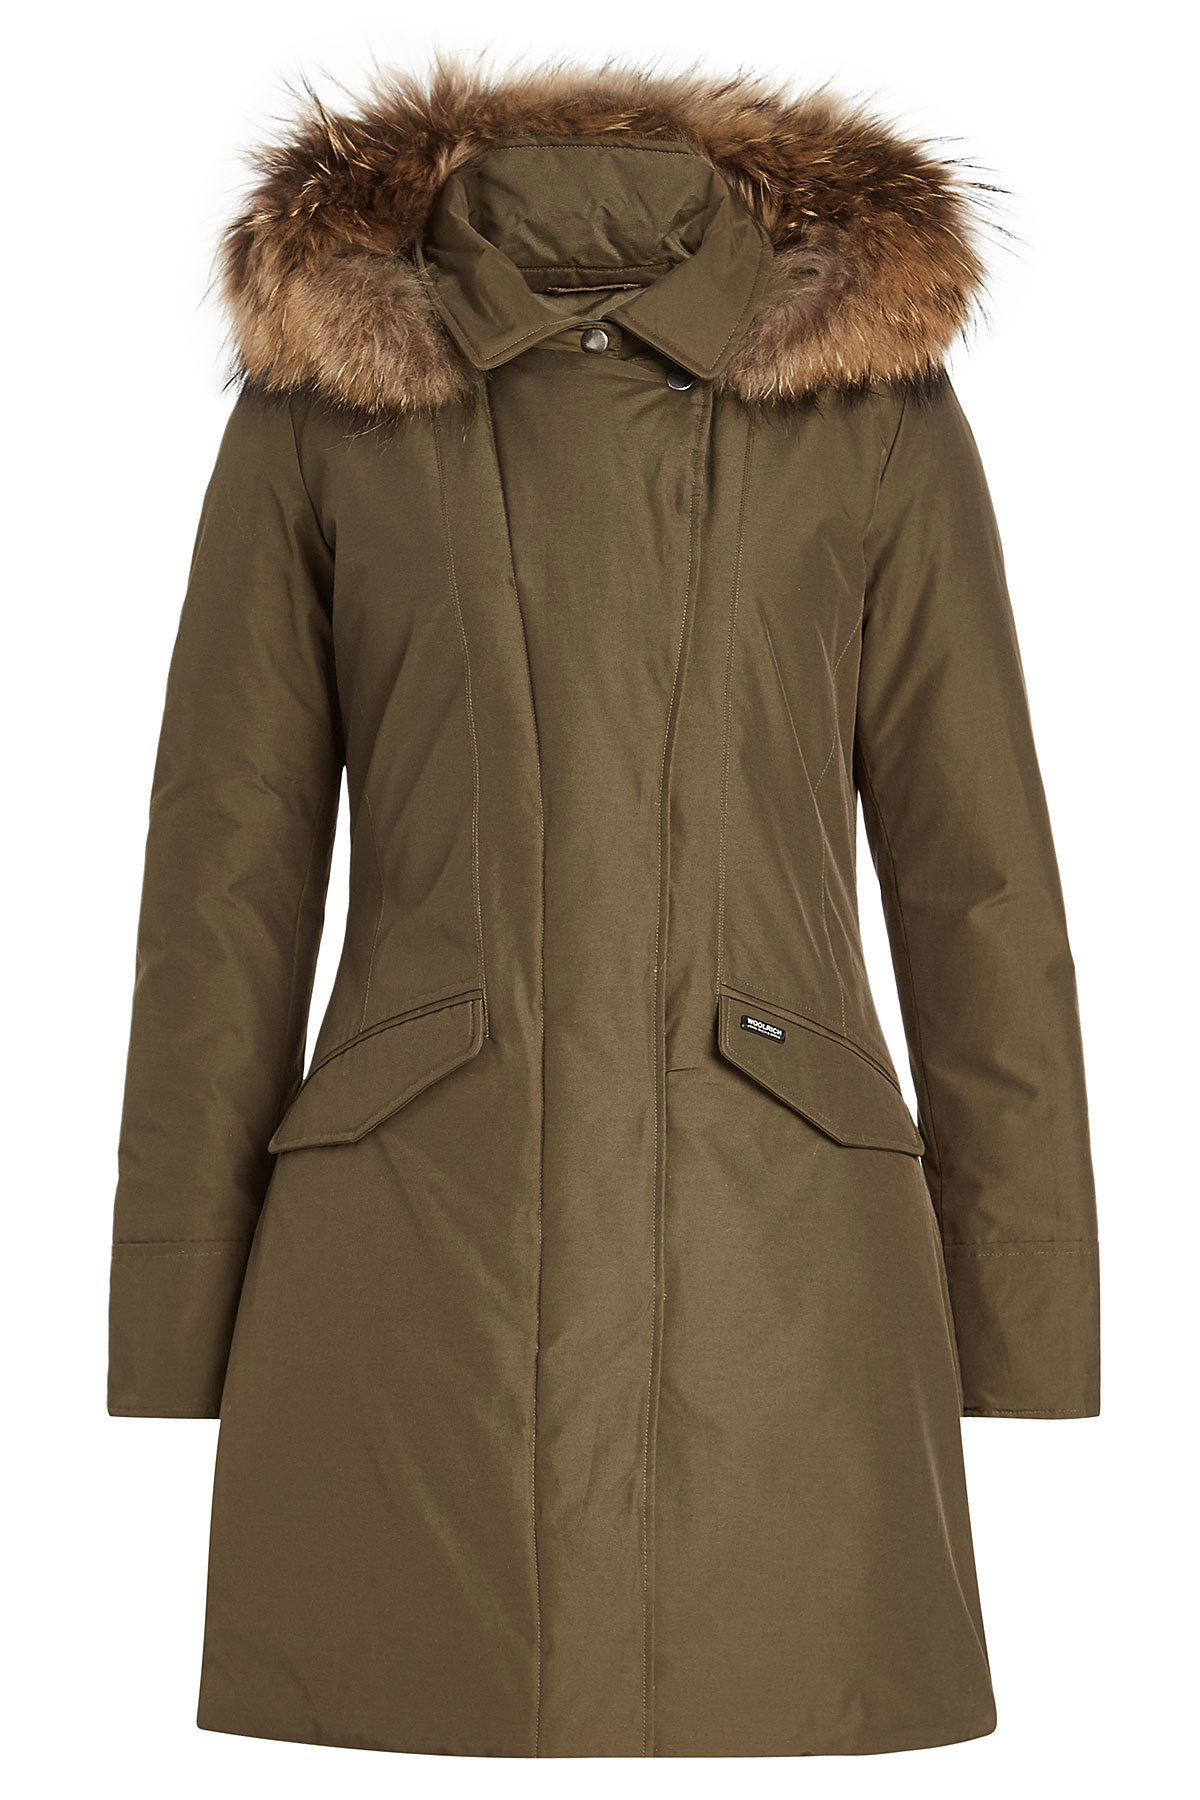 Woolrich - Wail Down Jacket with Fur-Trimmed Hood